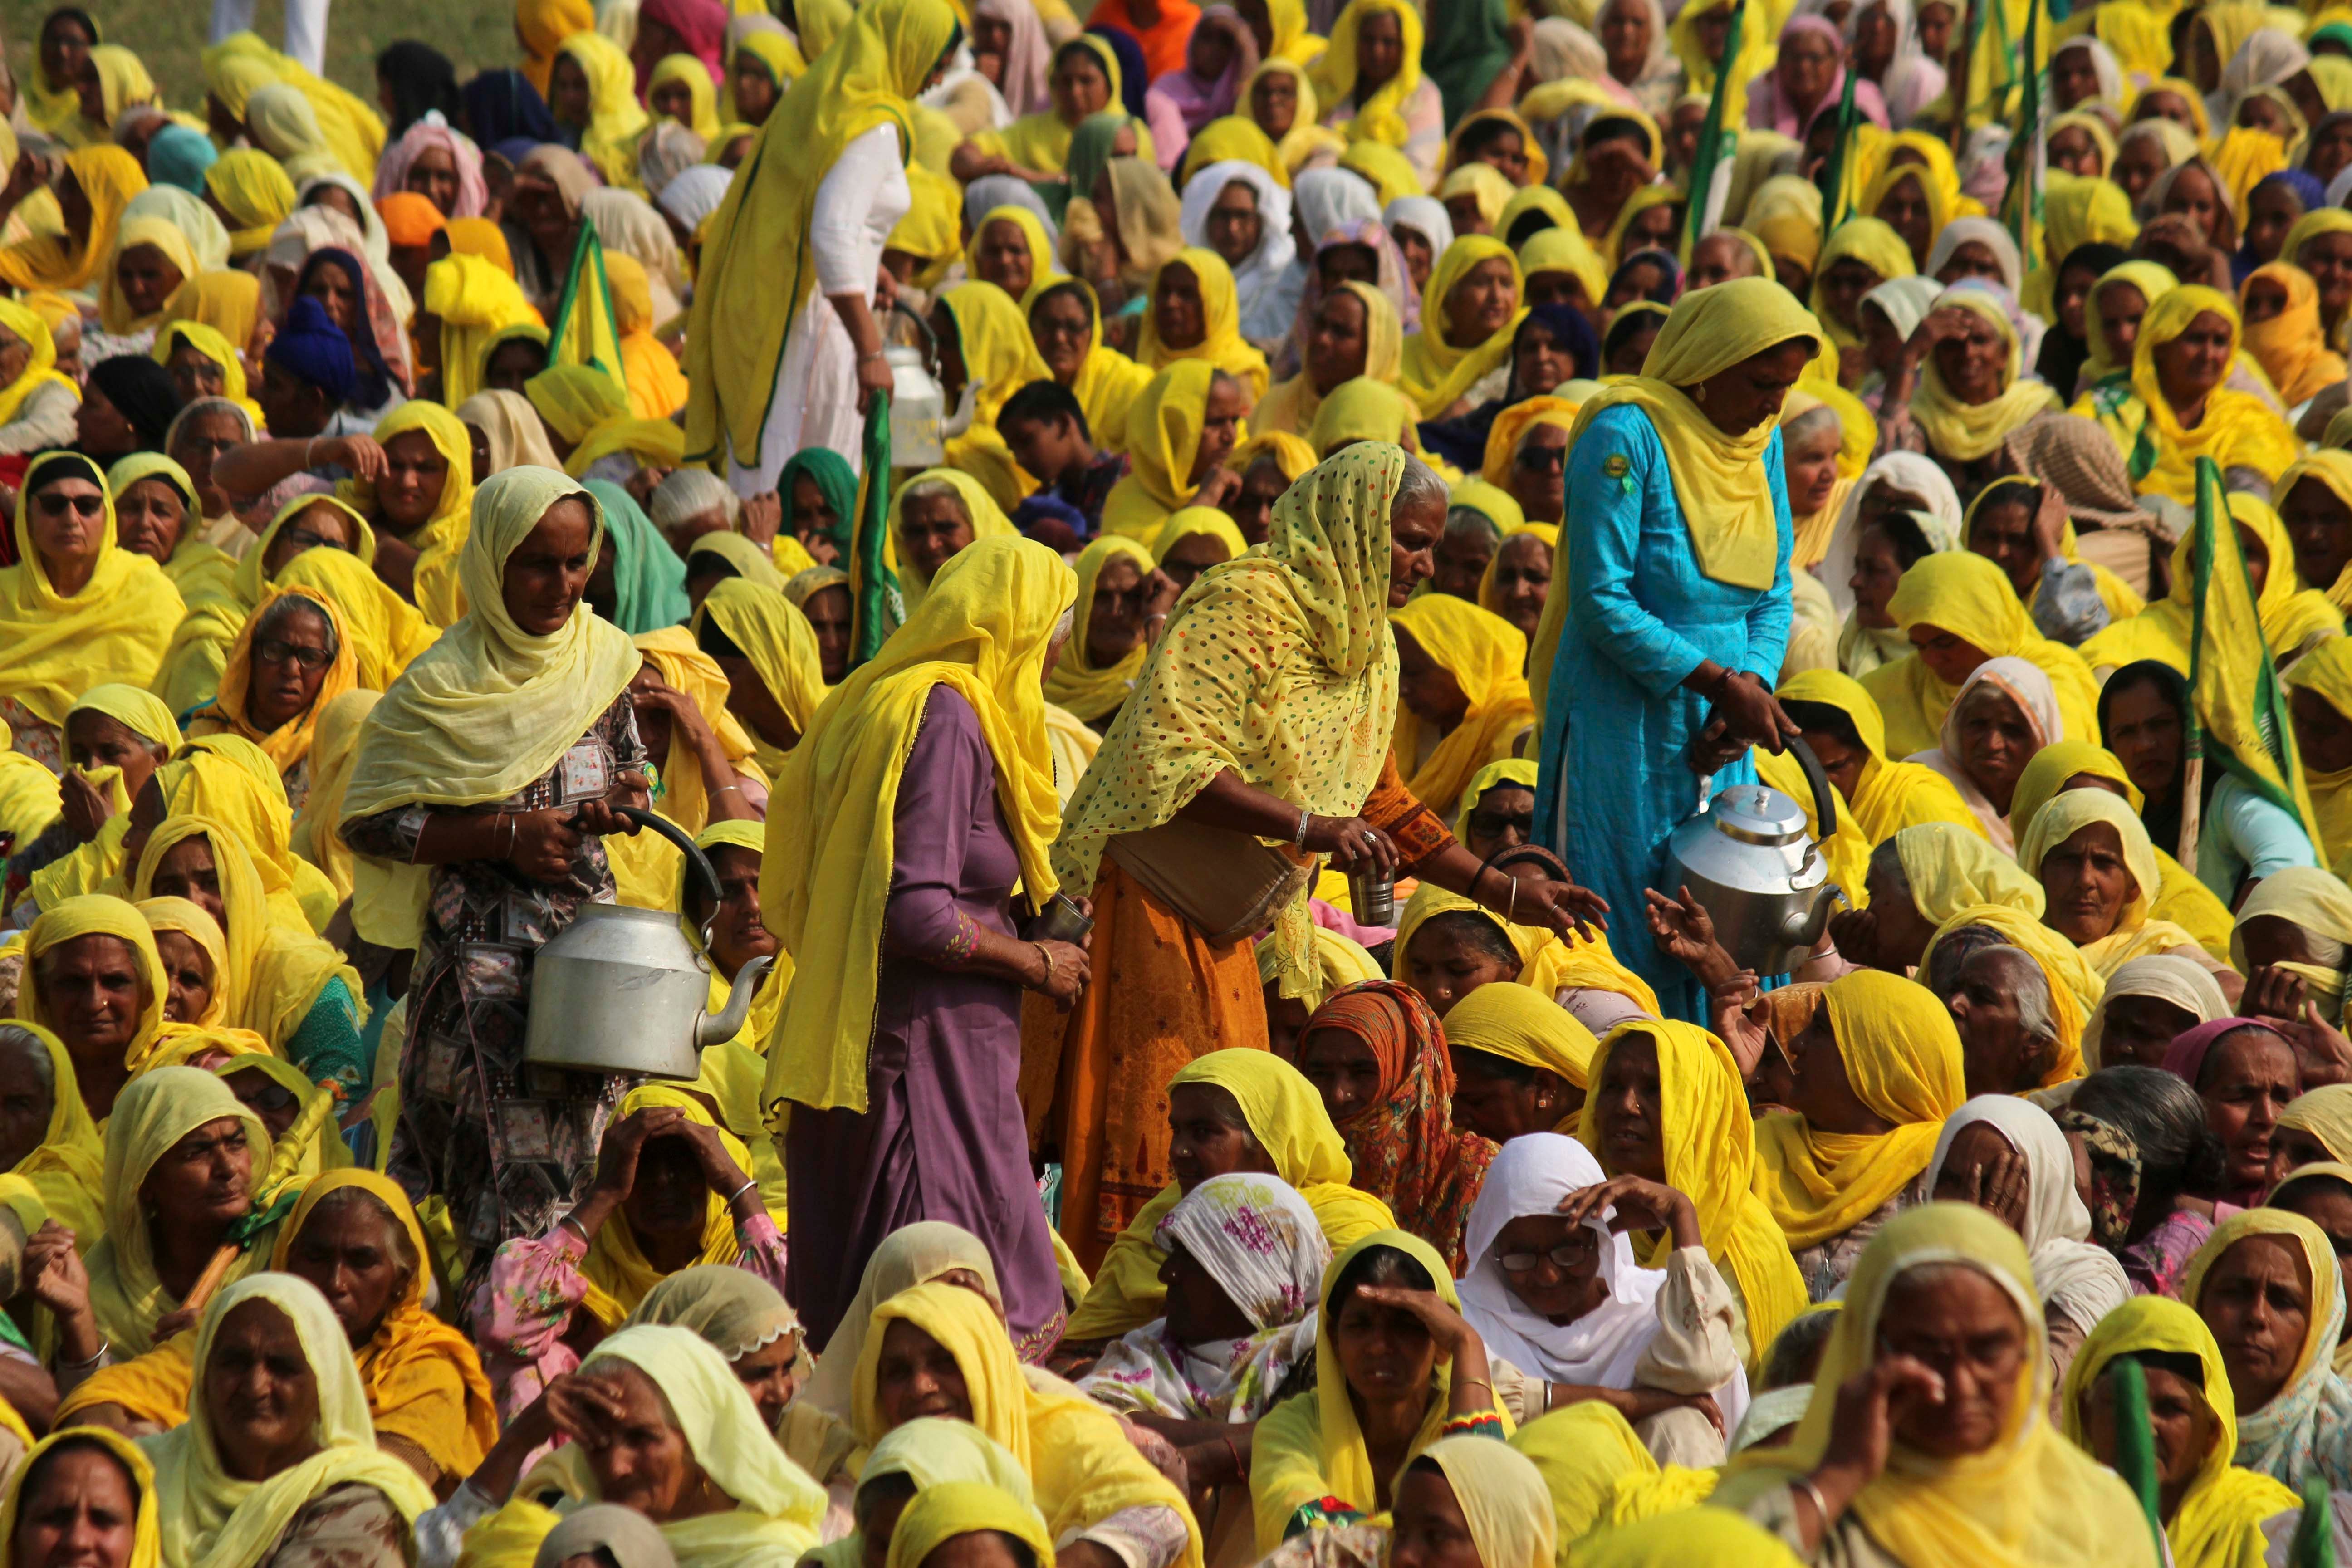 Women farmers attend a gathering to mark the first anniversary of their protests against controversial farm reforms at Haryana's Bahadurgarh, on the outskirts of New Delhi, India, November 26, 2021.